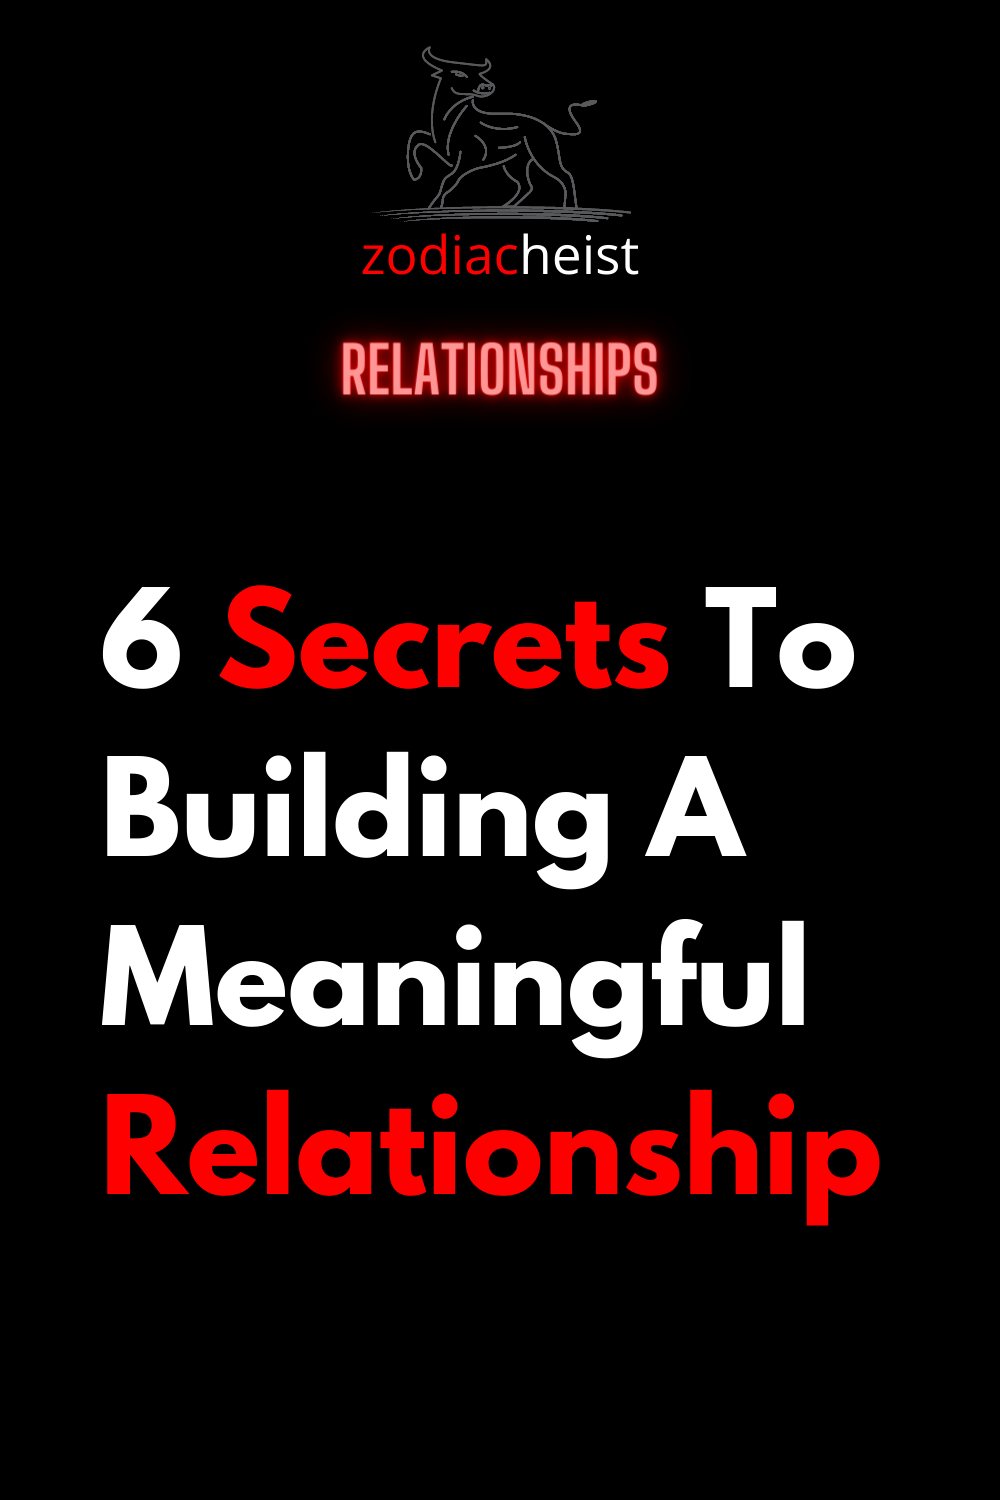 6 Secrets To Building A Meaningful Relationship